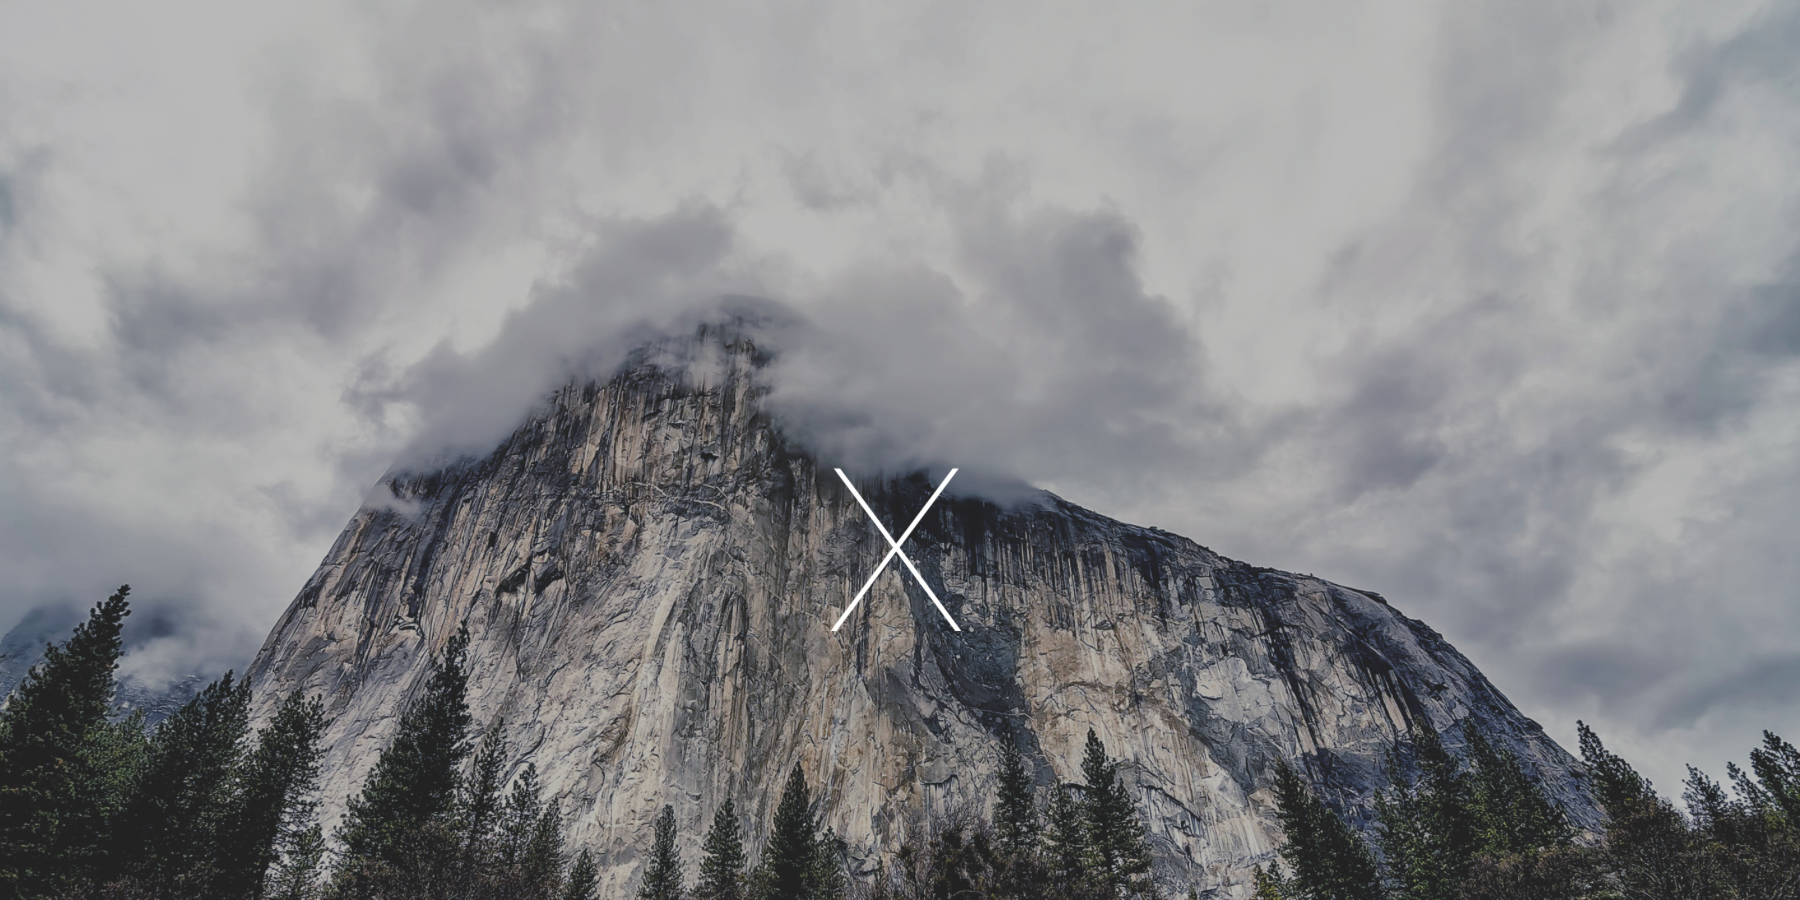 what is the latest version of yosemite for mac as of 2017